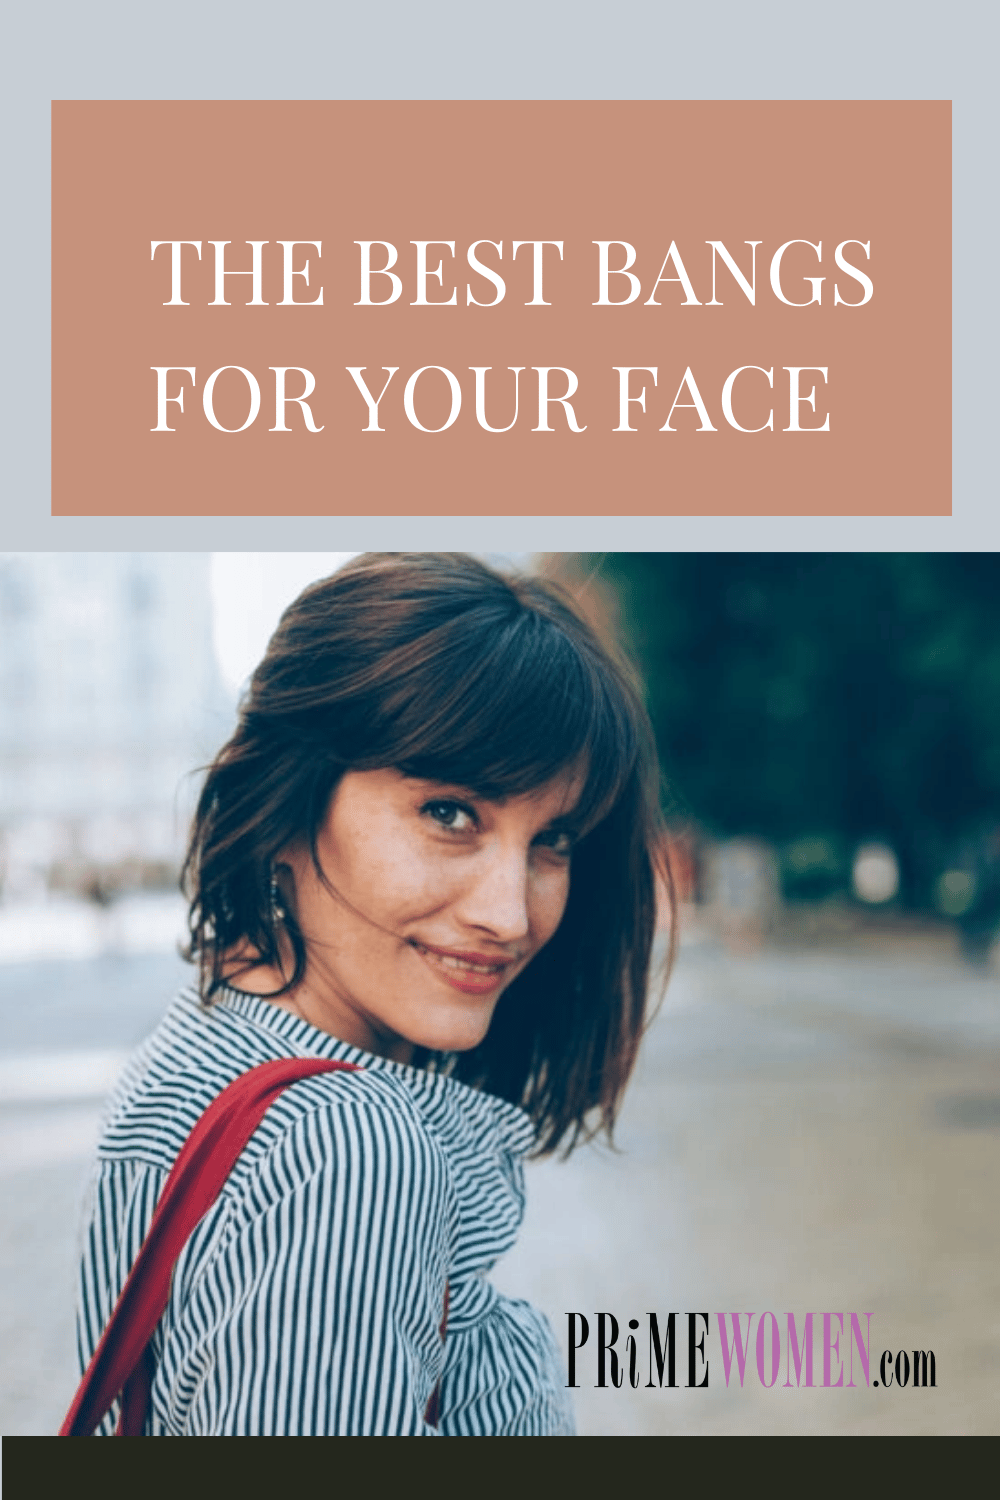 The best bangs for your face